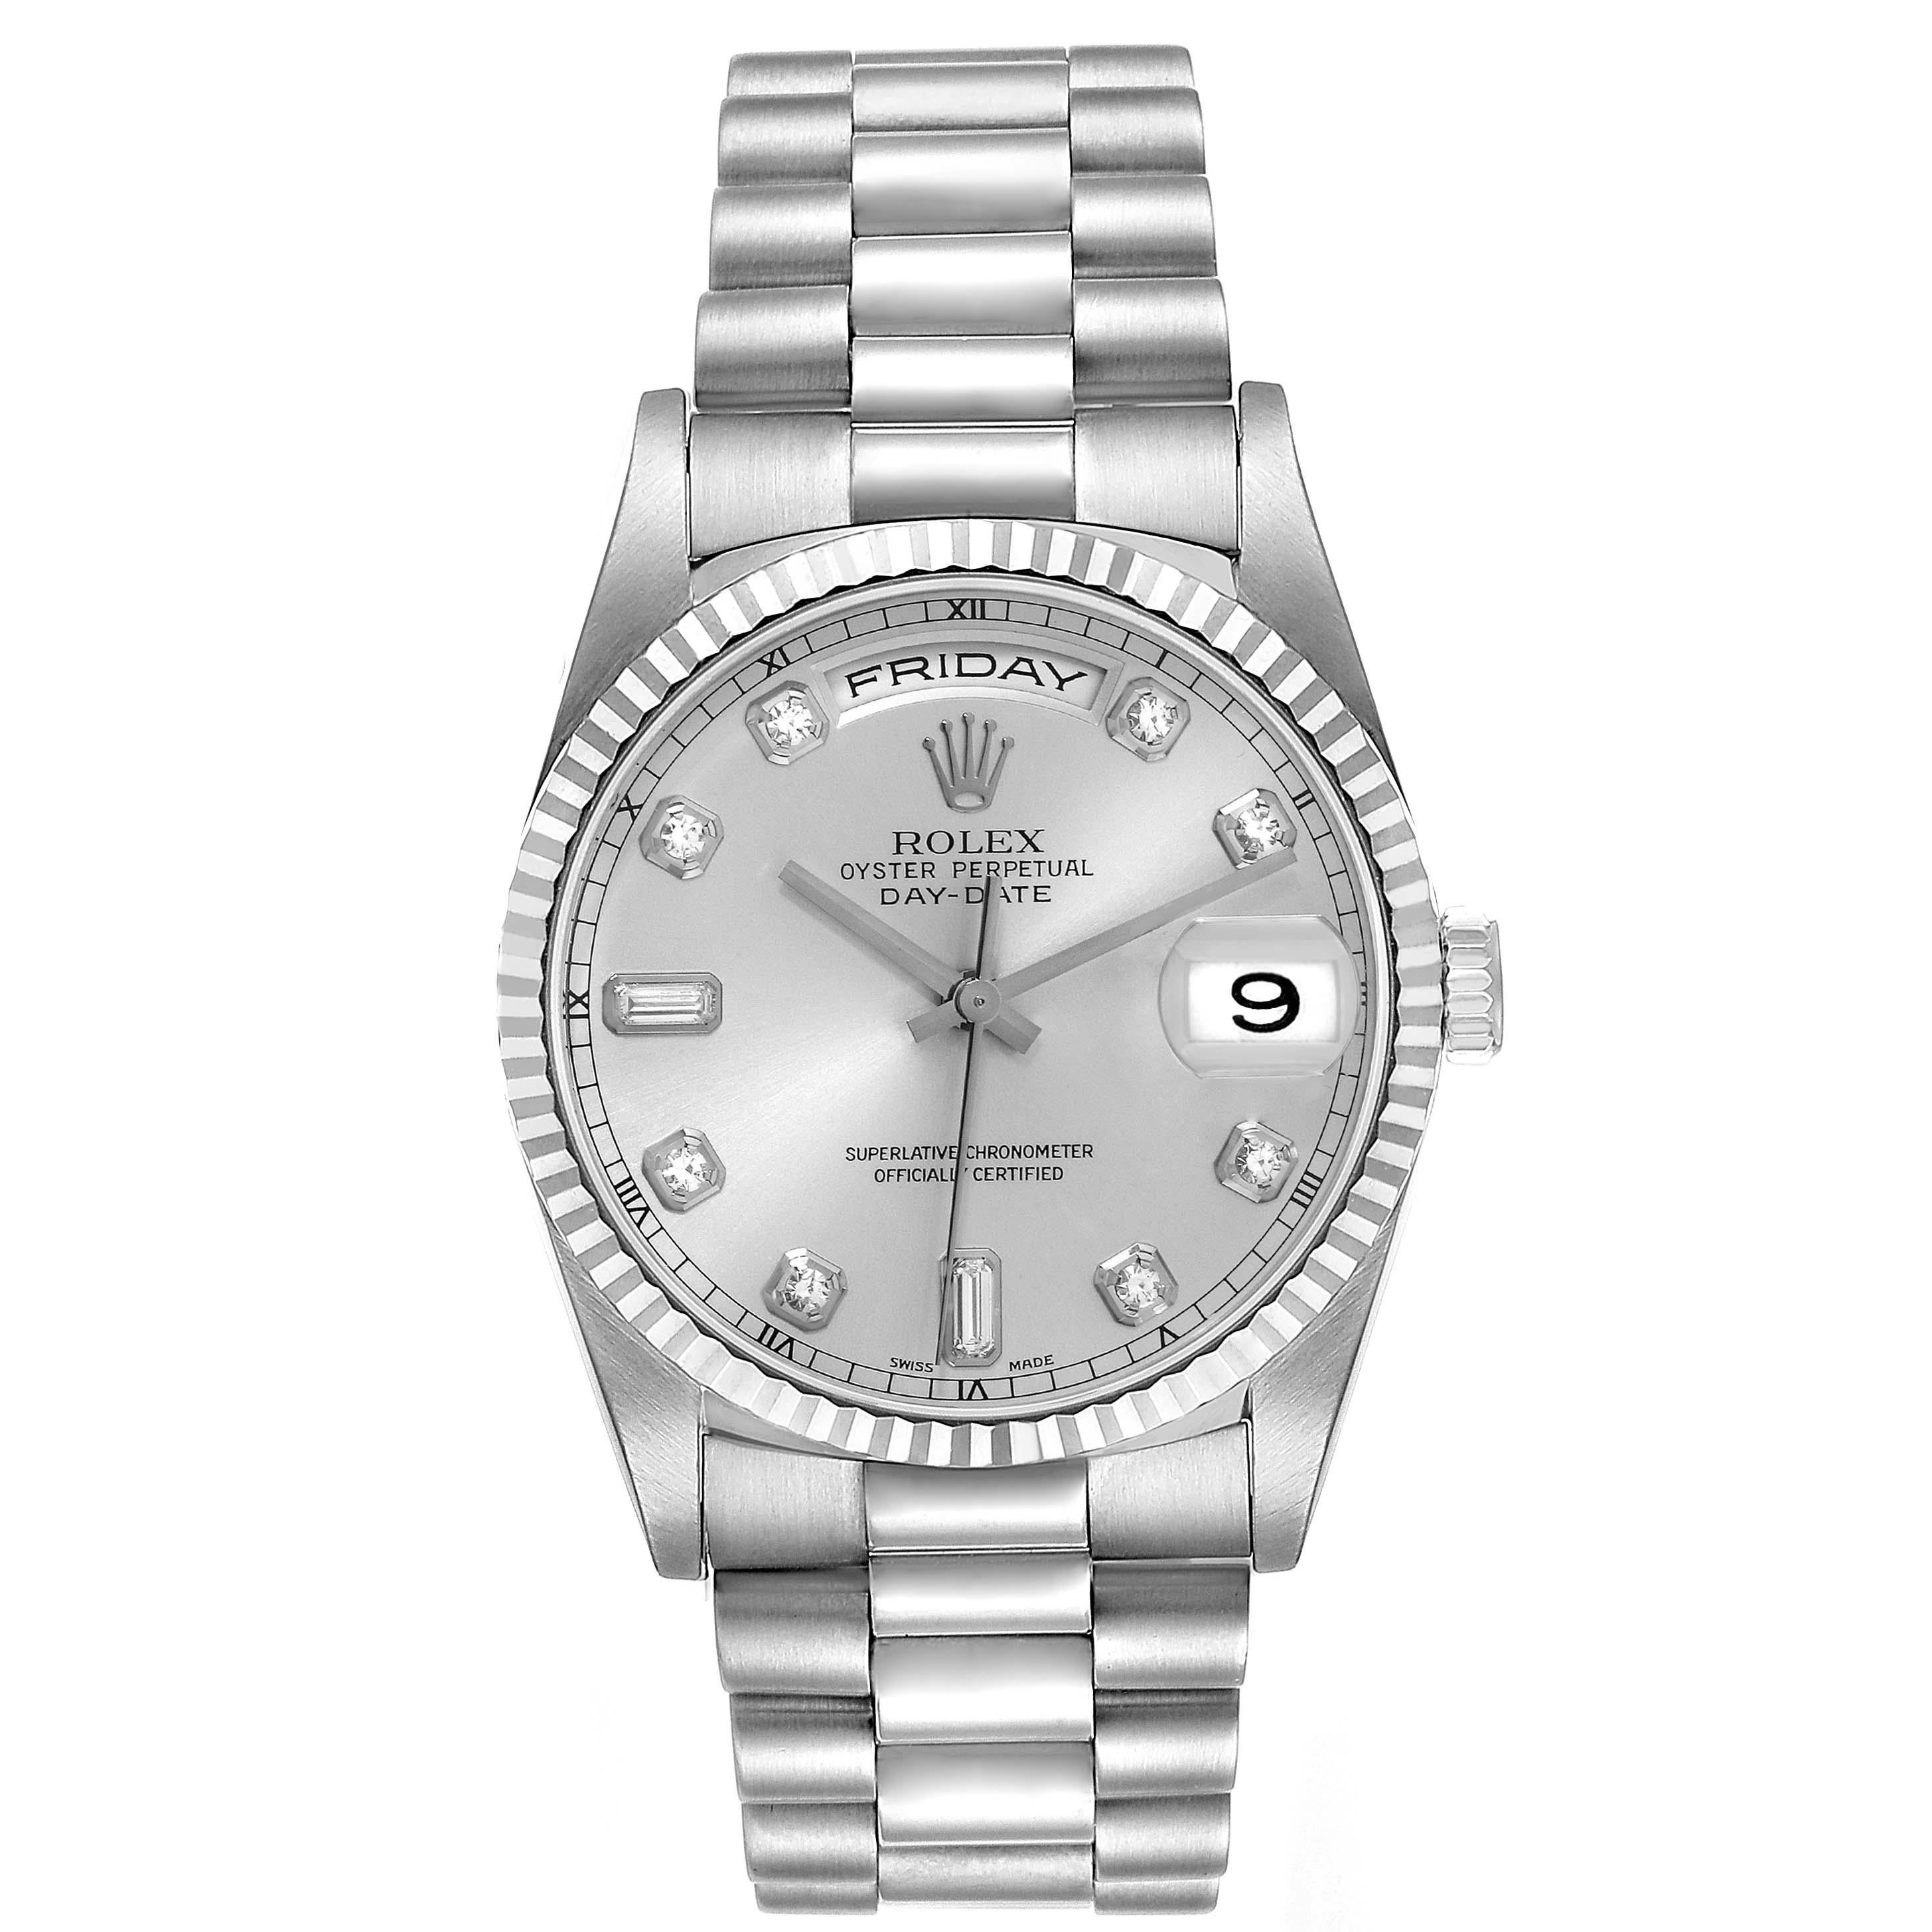 Rolex President Day-Date White Gold Diamond Mens Watch 18239 Box Papers. Officially certified chronometer self-winding movement with quickset date function. 18k white gold oyster case 36.0 mm in diameter. Rolex logo on a crown. 18k white gold fluted